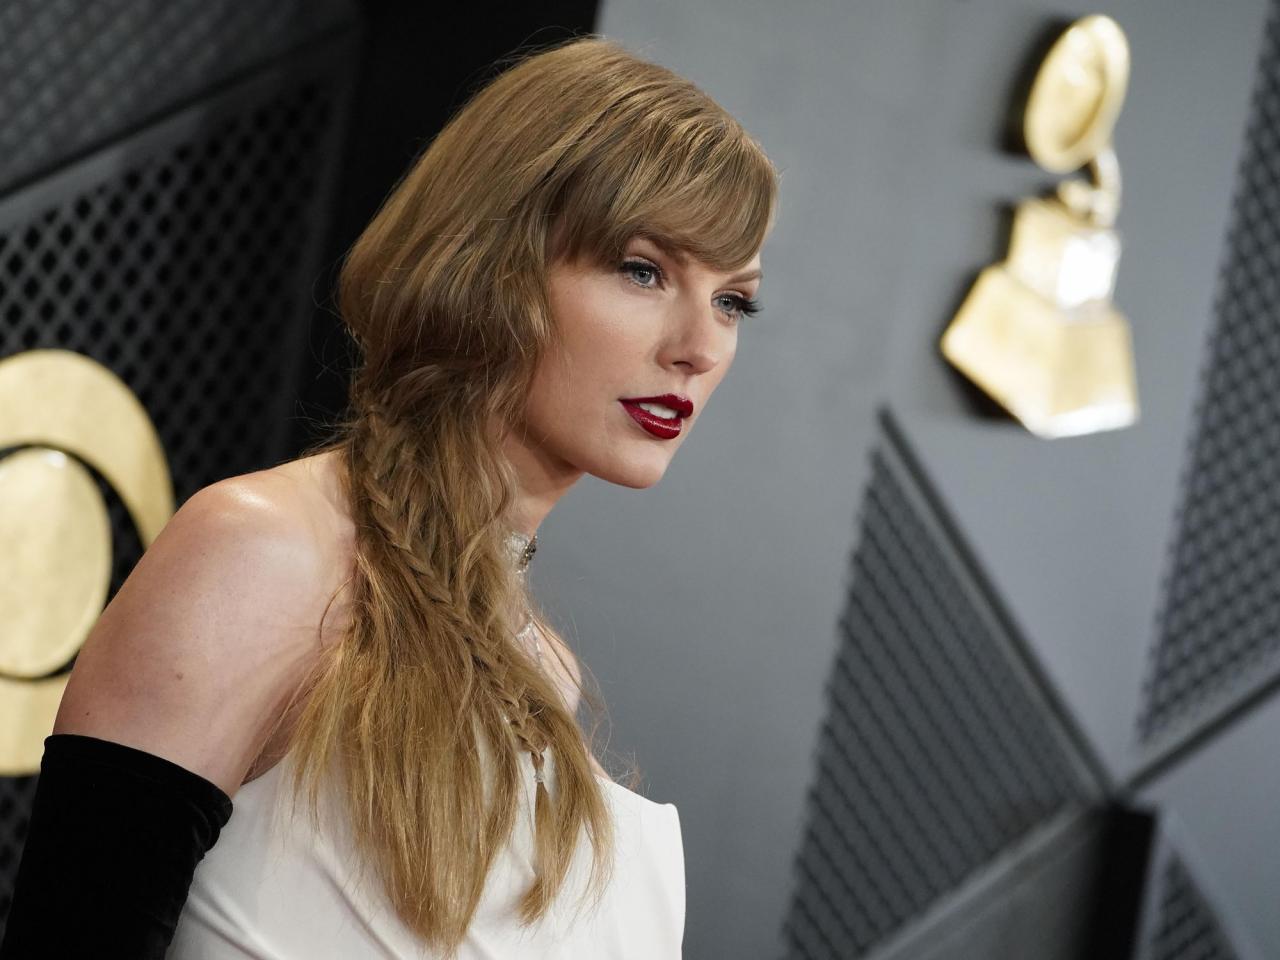 Taylor Swift has requested that this university student ceases monitoring her personal aircraft.